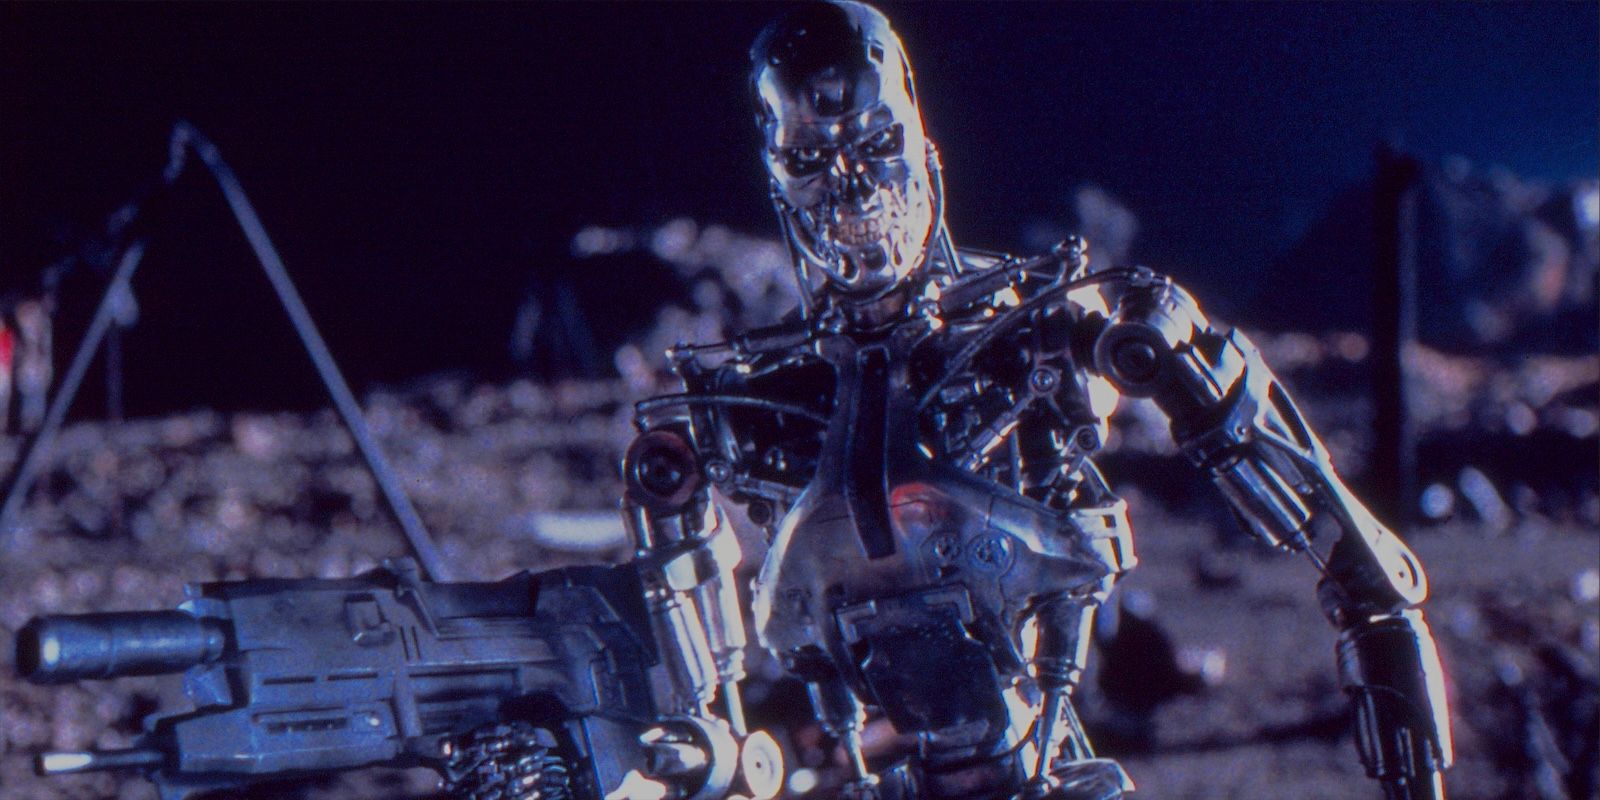 A T-800 from Terminator 2: Judgment Day holding a weapon